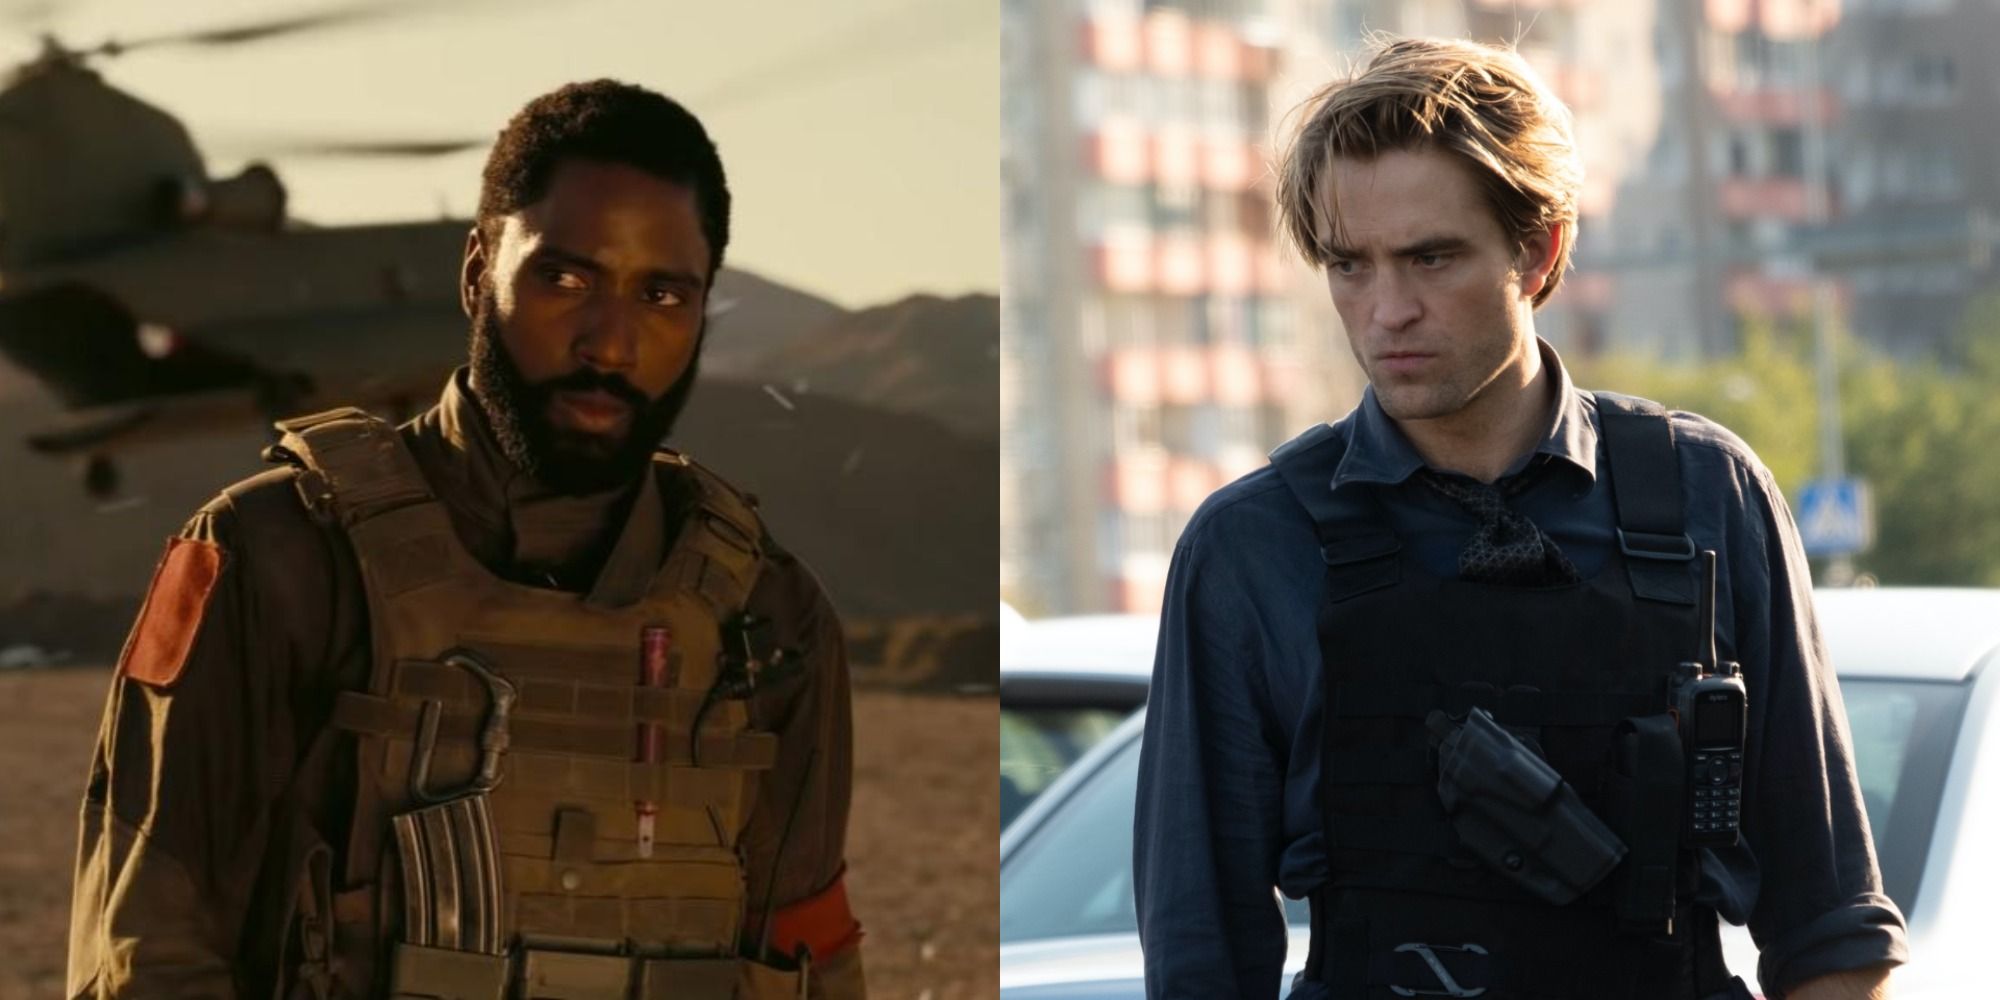 Side by side images of John David Washington and Robert Pattinson in tactical gear in Tenet